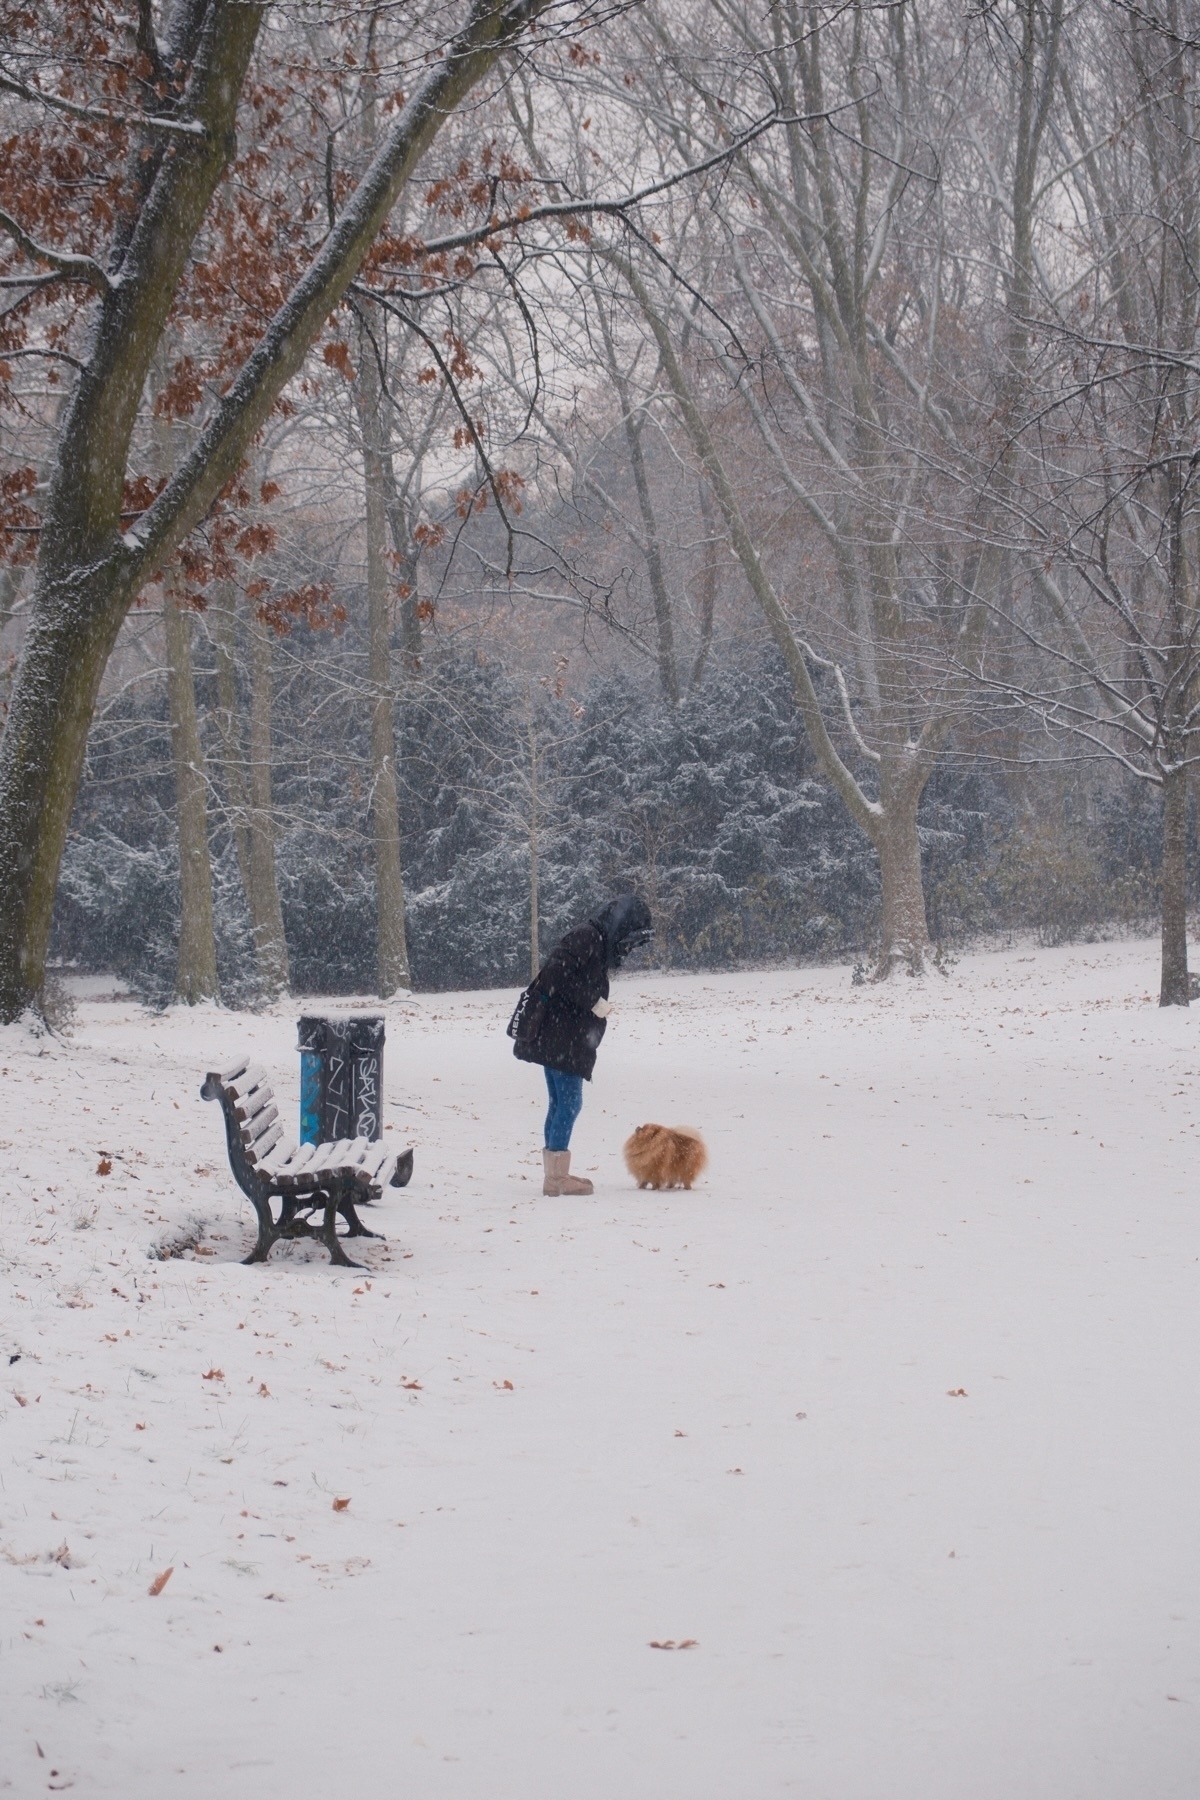 A person bundled in winter clothing and a small dog patiently looking up to that person on a snow-covered path in a park with trees, a bench, and a trash can covered in grafiti. It is snowing.